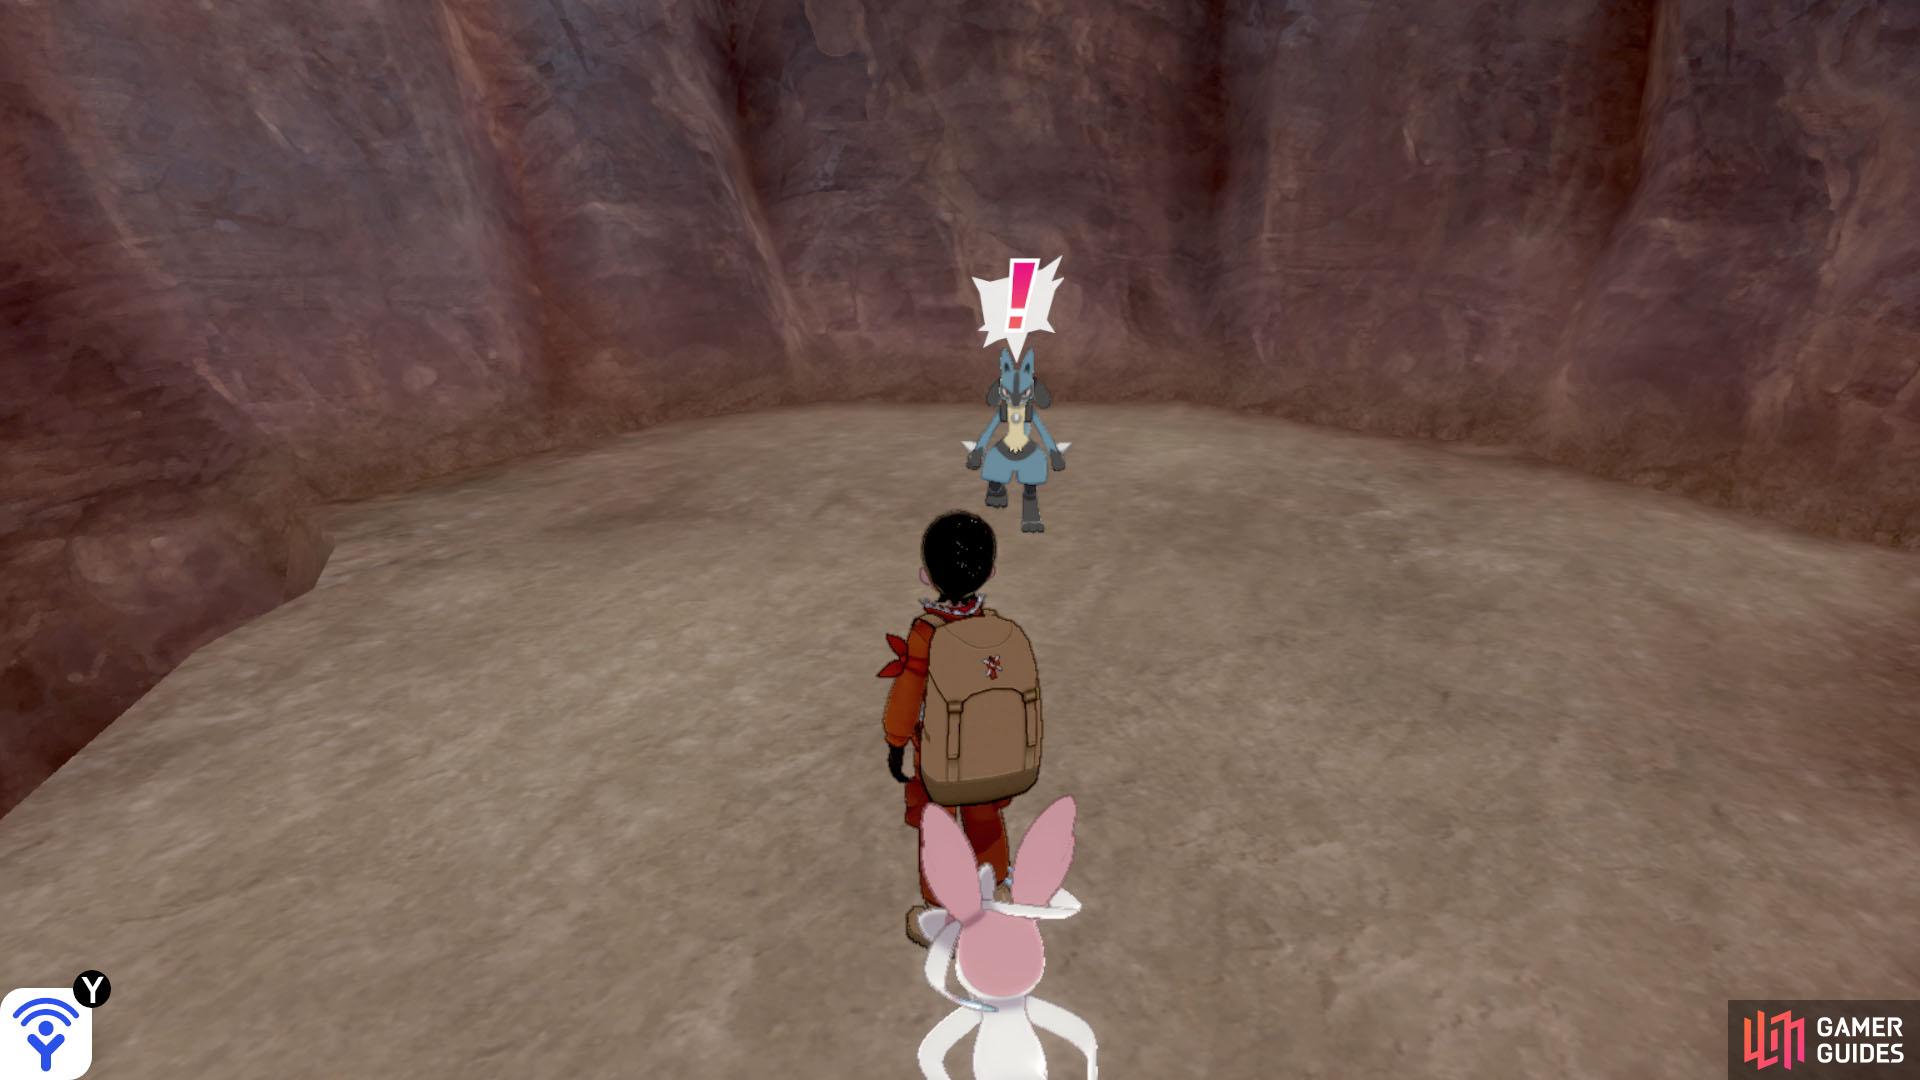 You haven't lived until you've been chased by a Lucario.